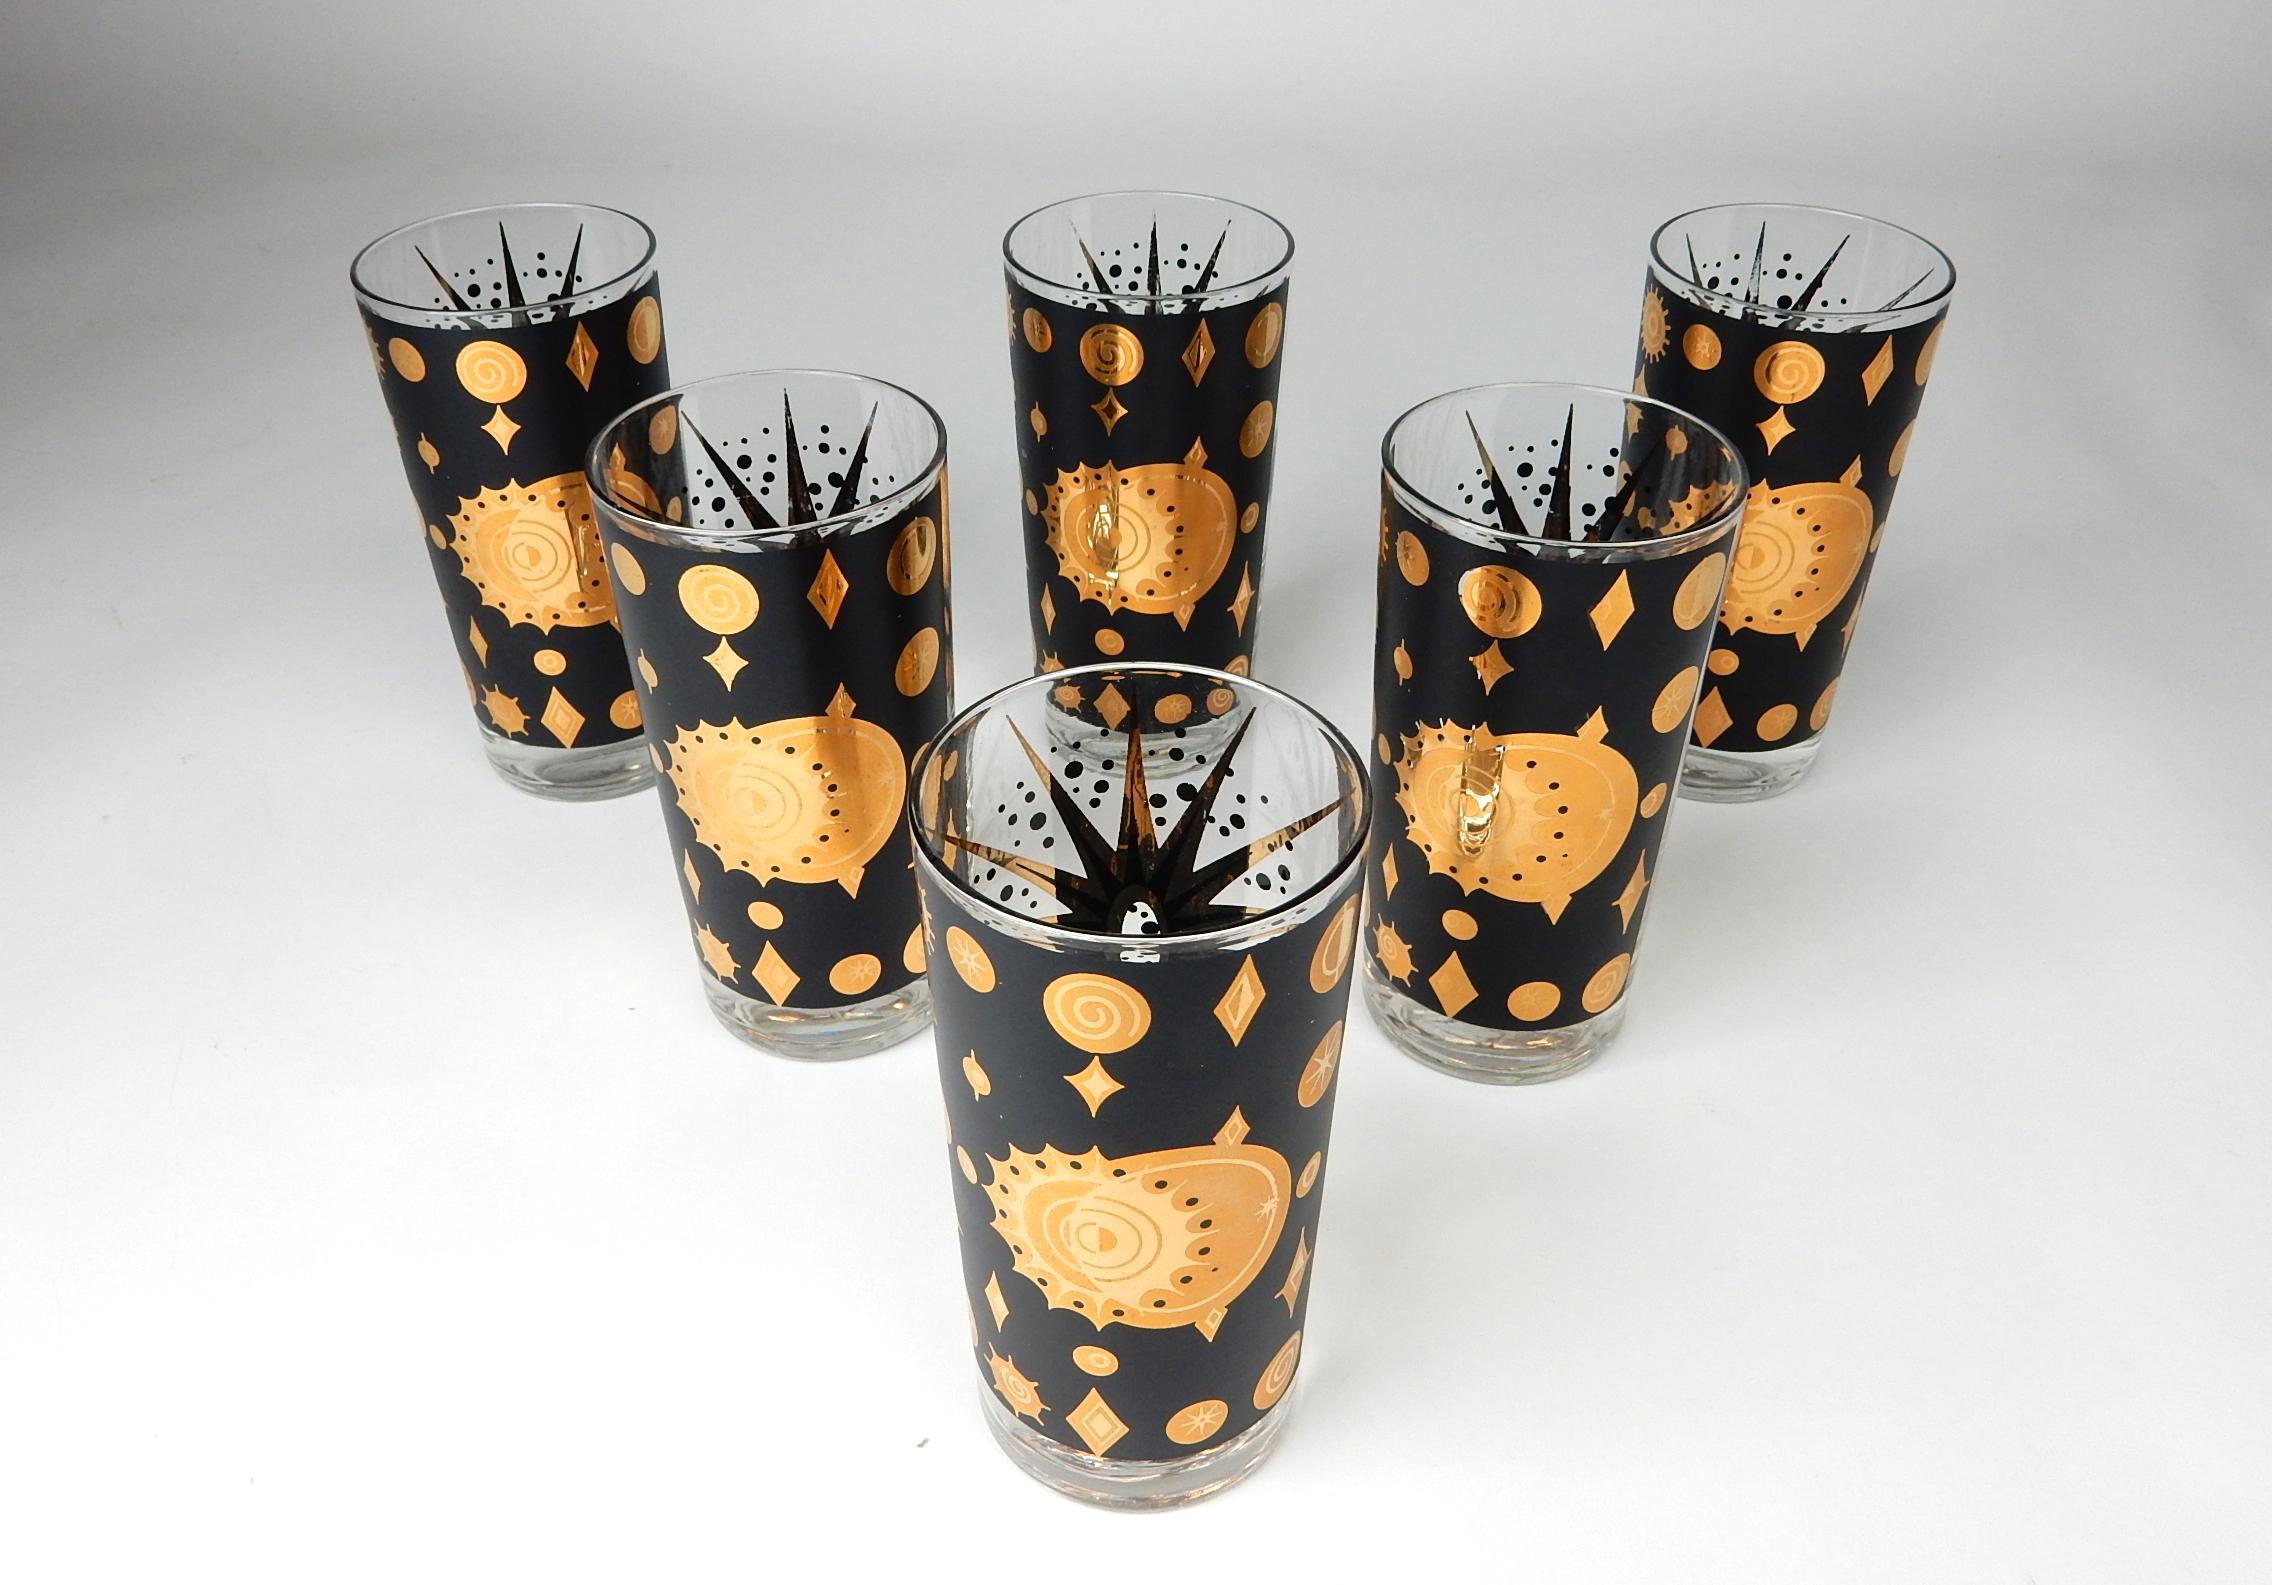 Spectacular set of hi-ball bar glasses by Fred Press.
Big golden star on one side and celestial gold planets of the other.
Set shows light use only.